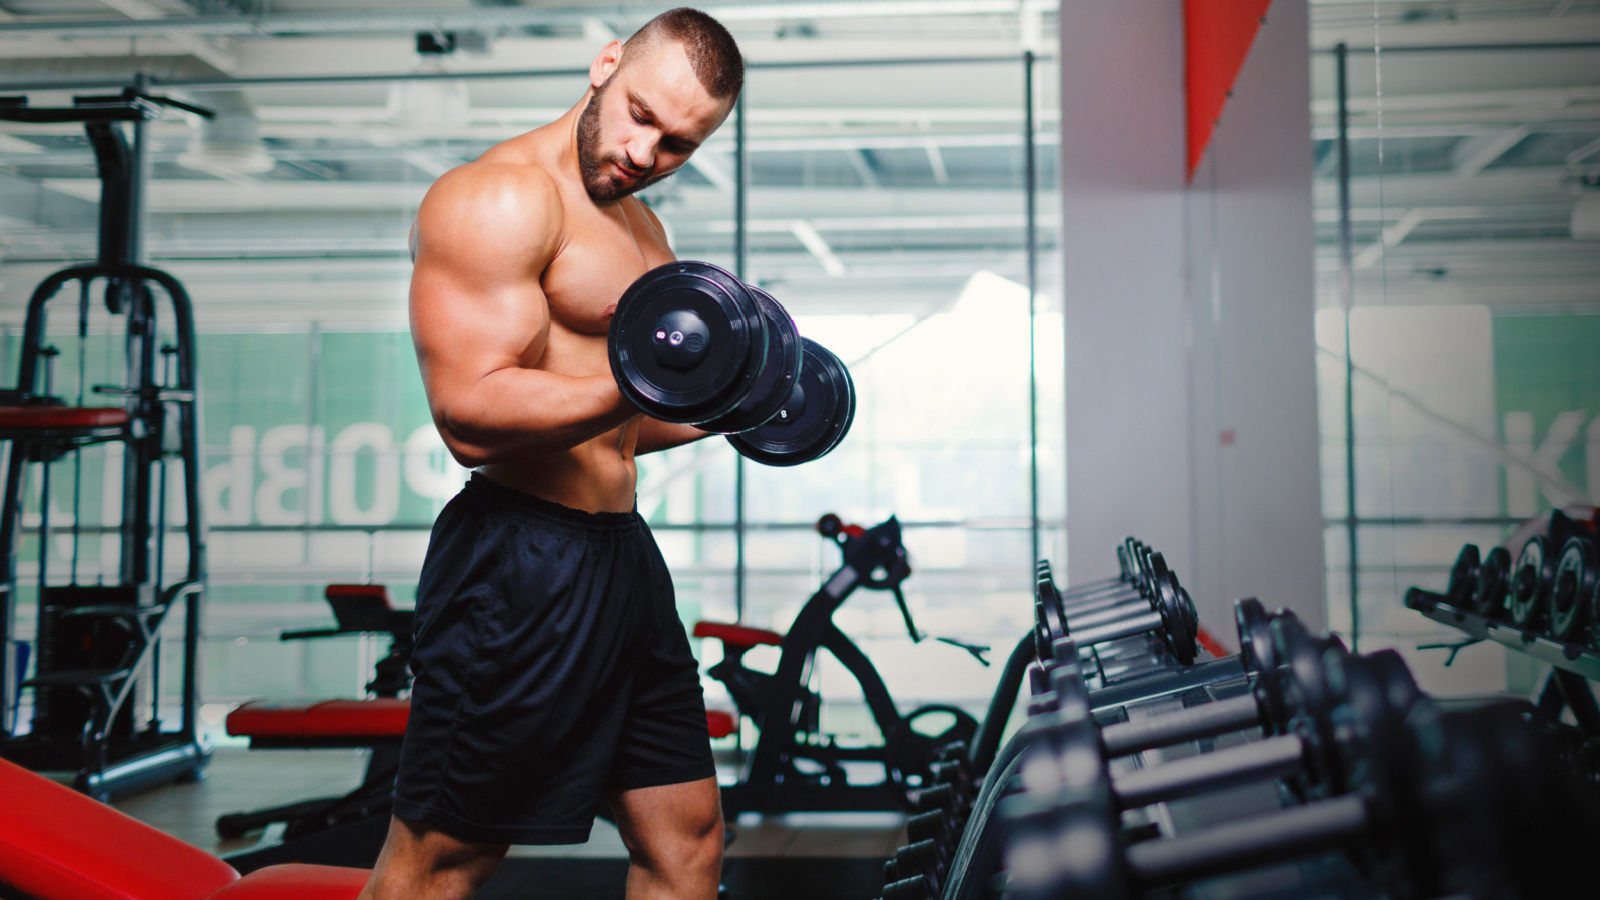 The 15 Best Shoulder Exercises for Building Muscle